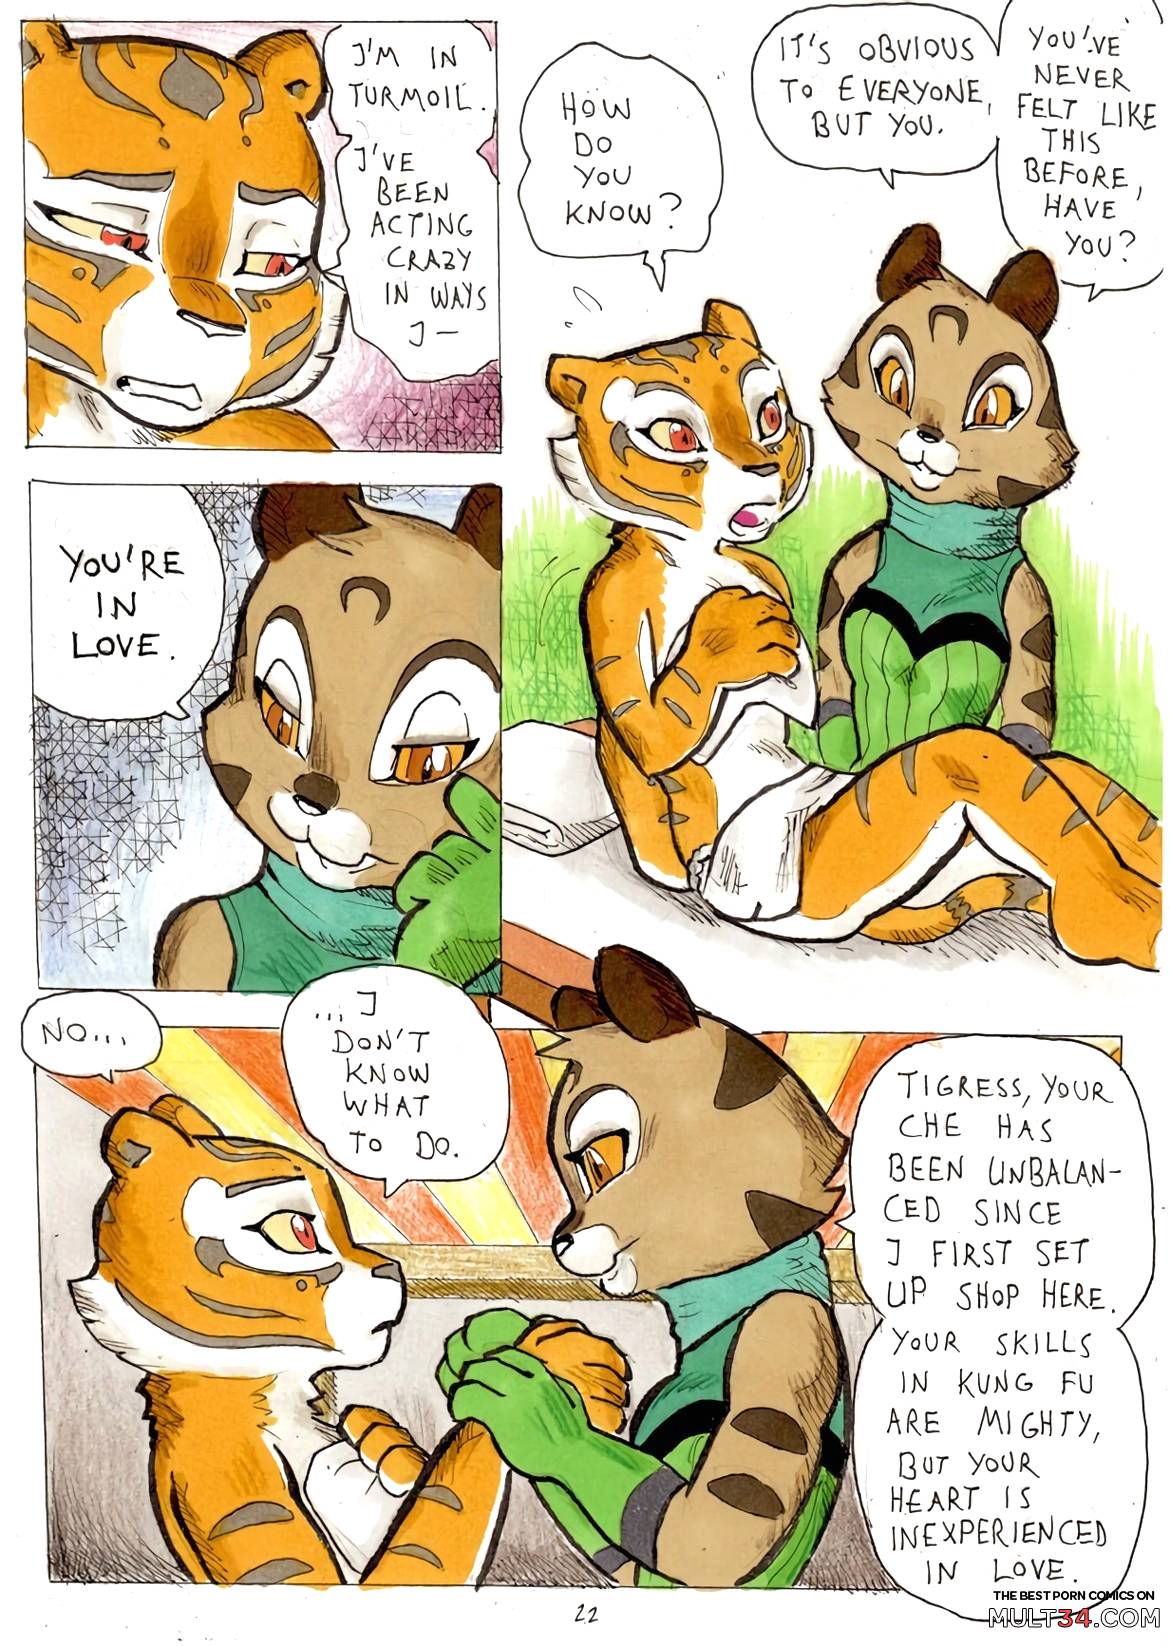 Better Late than Never 1 page 24